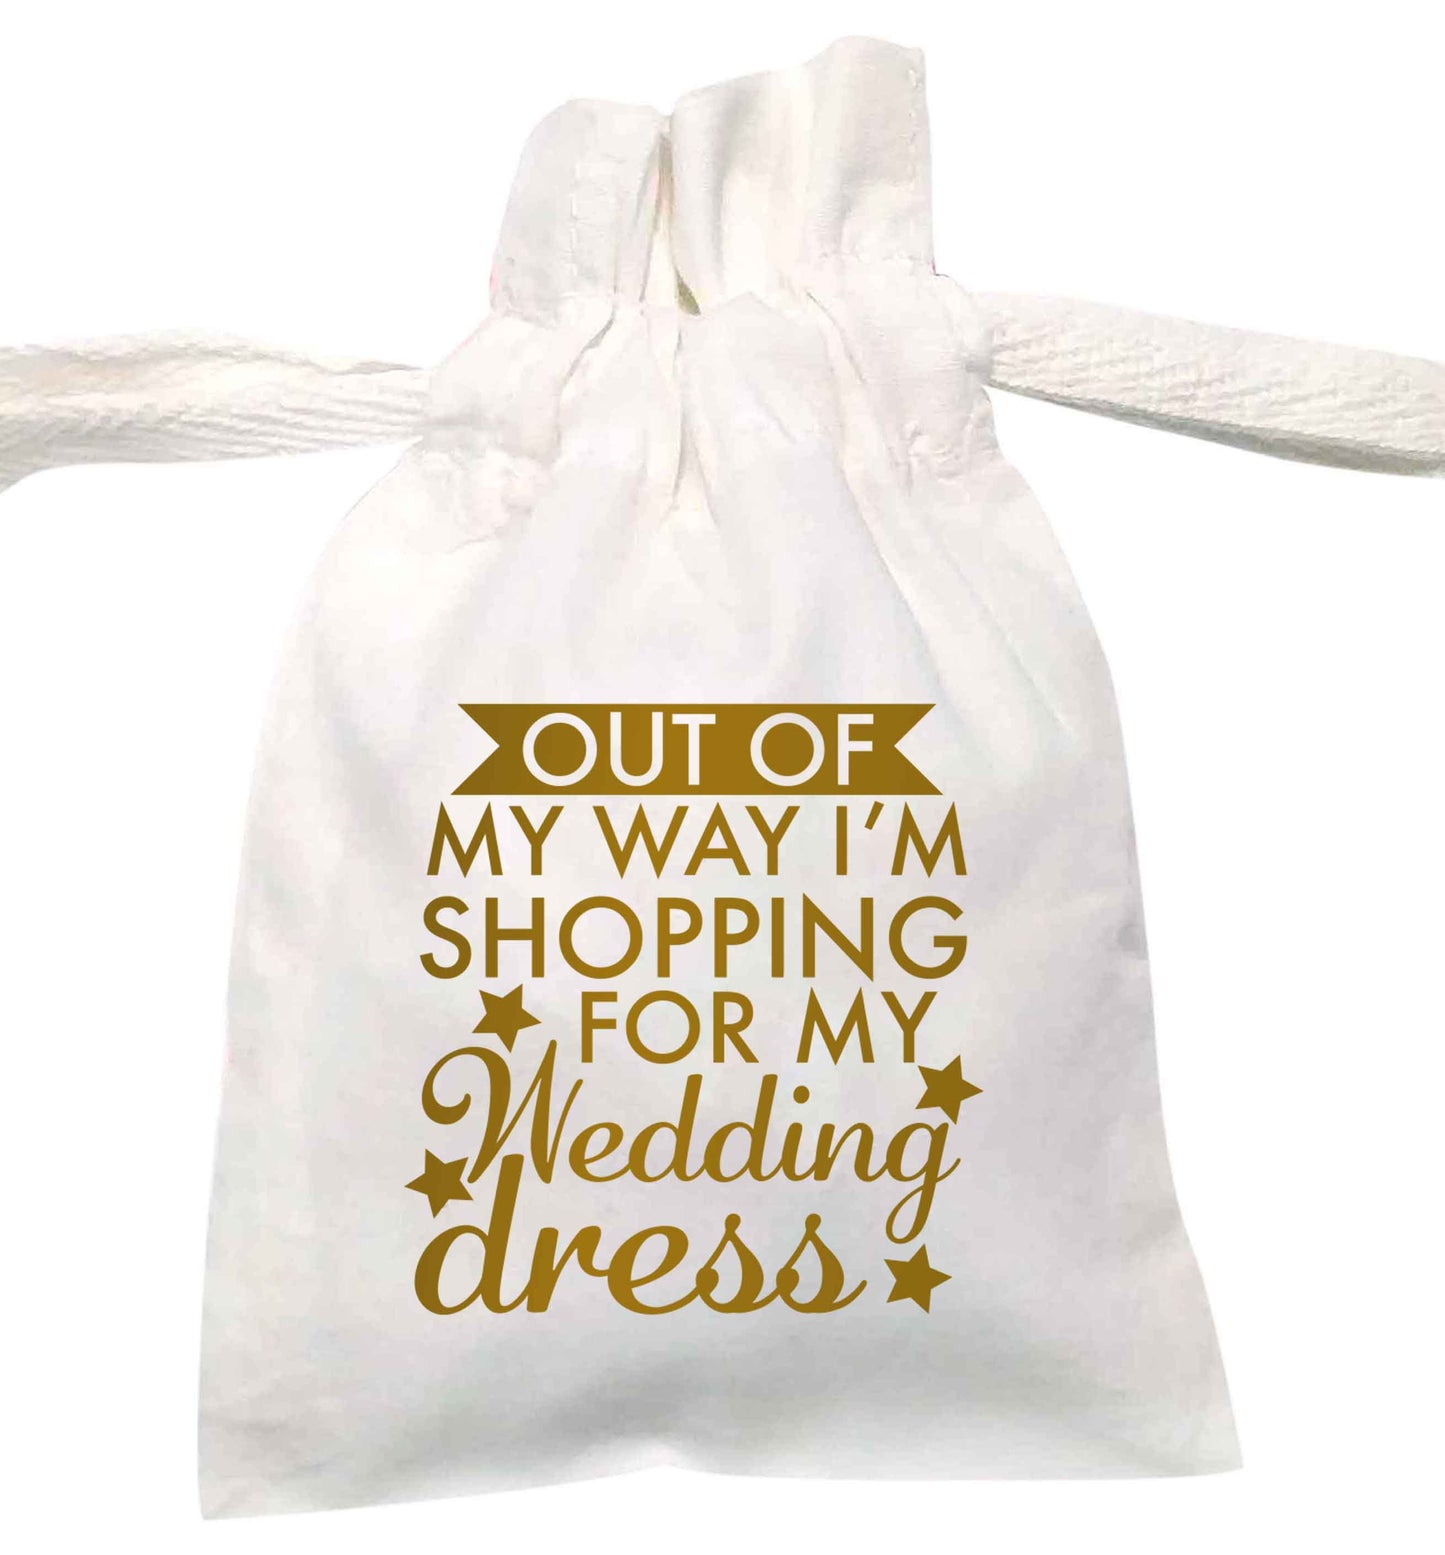 Out of my way I'm shopping for my wedding dress | XS - L | Pouch / Drawstring bag / Sack | Organic Cotton | Bulk discounts available!